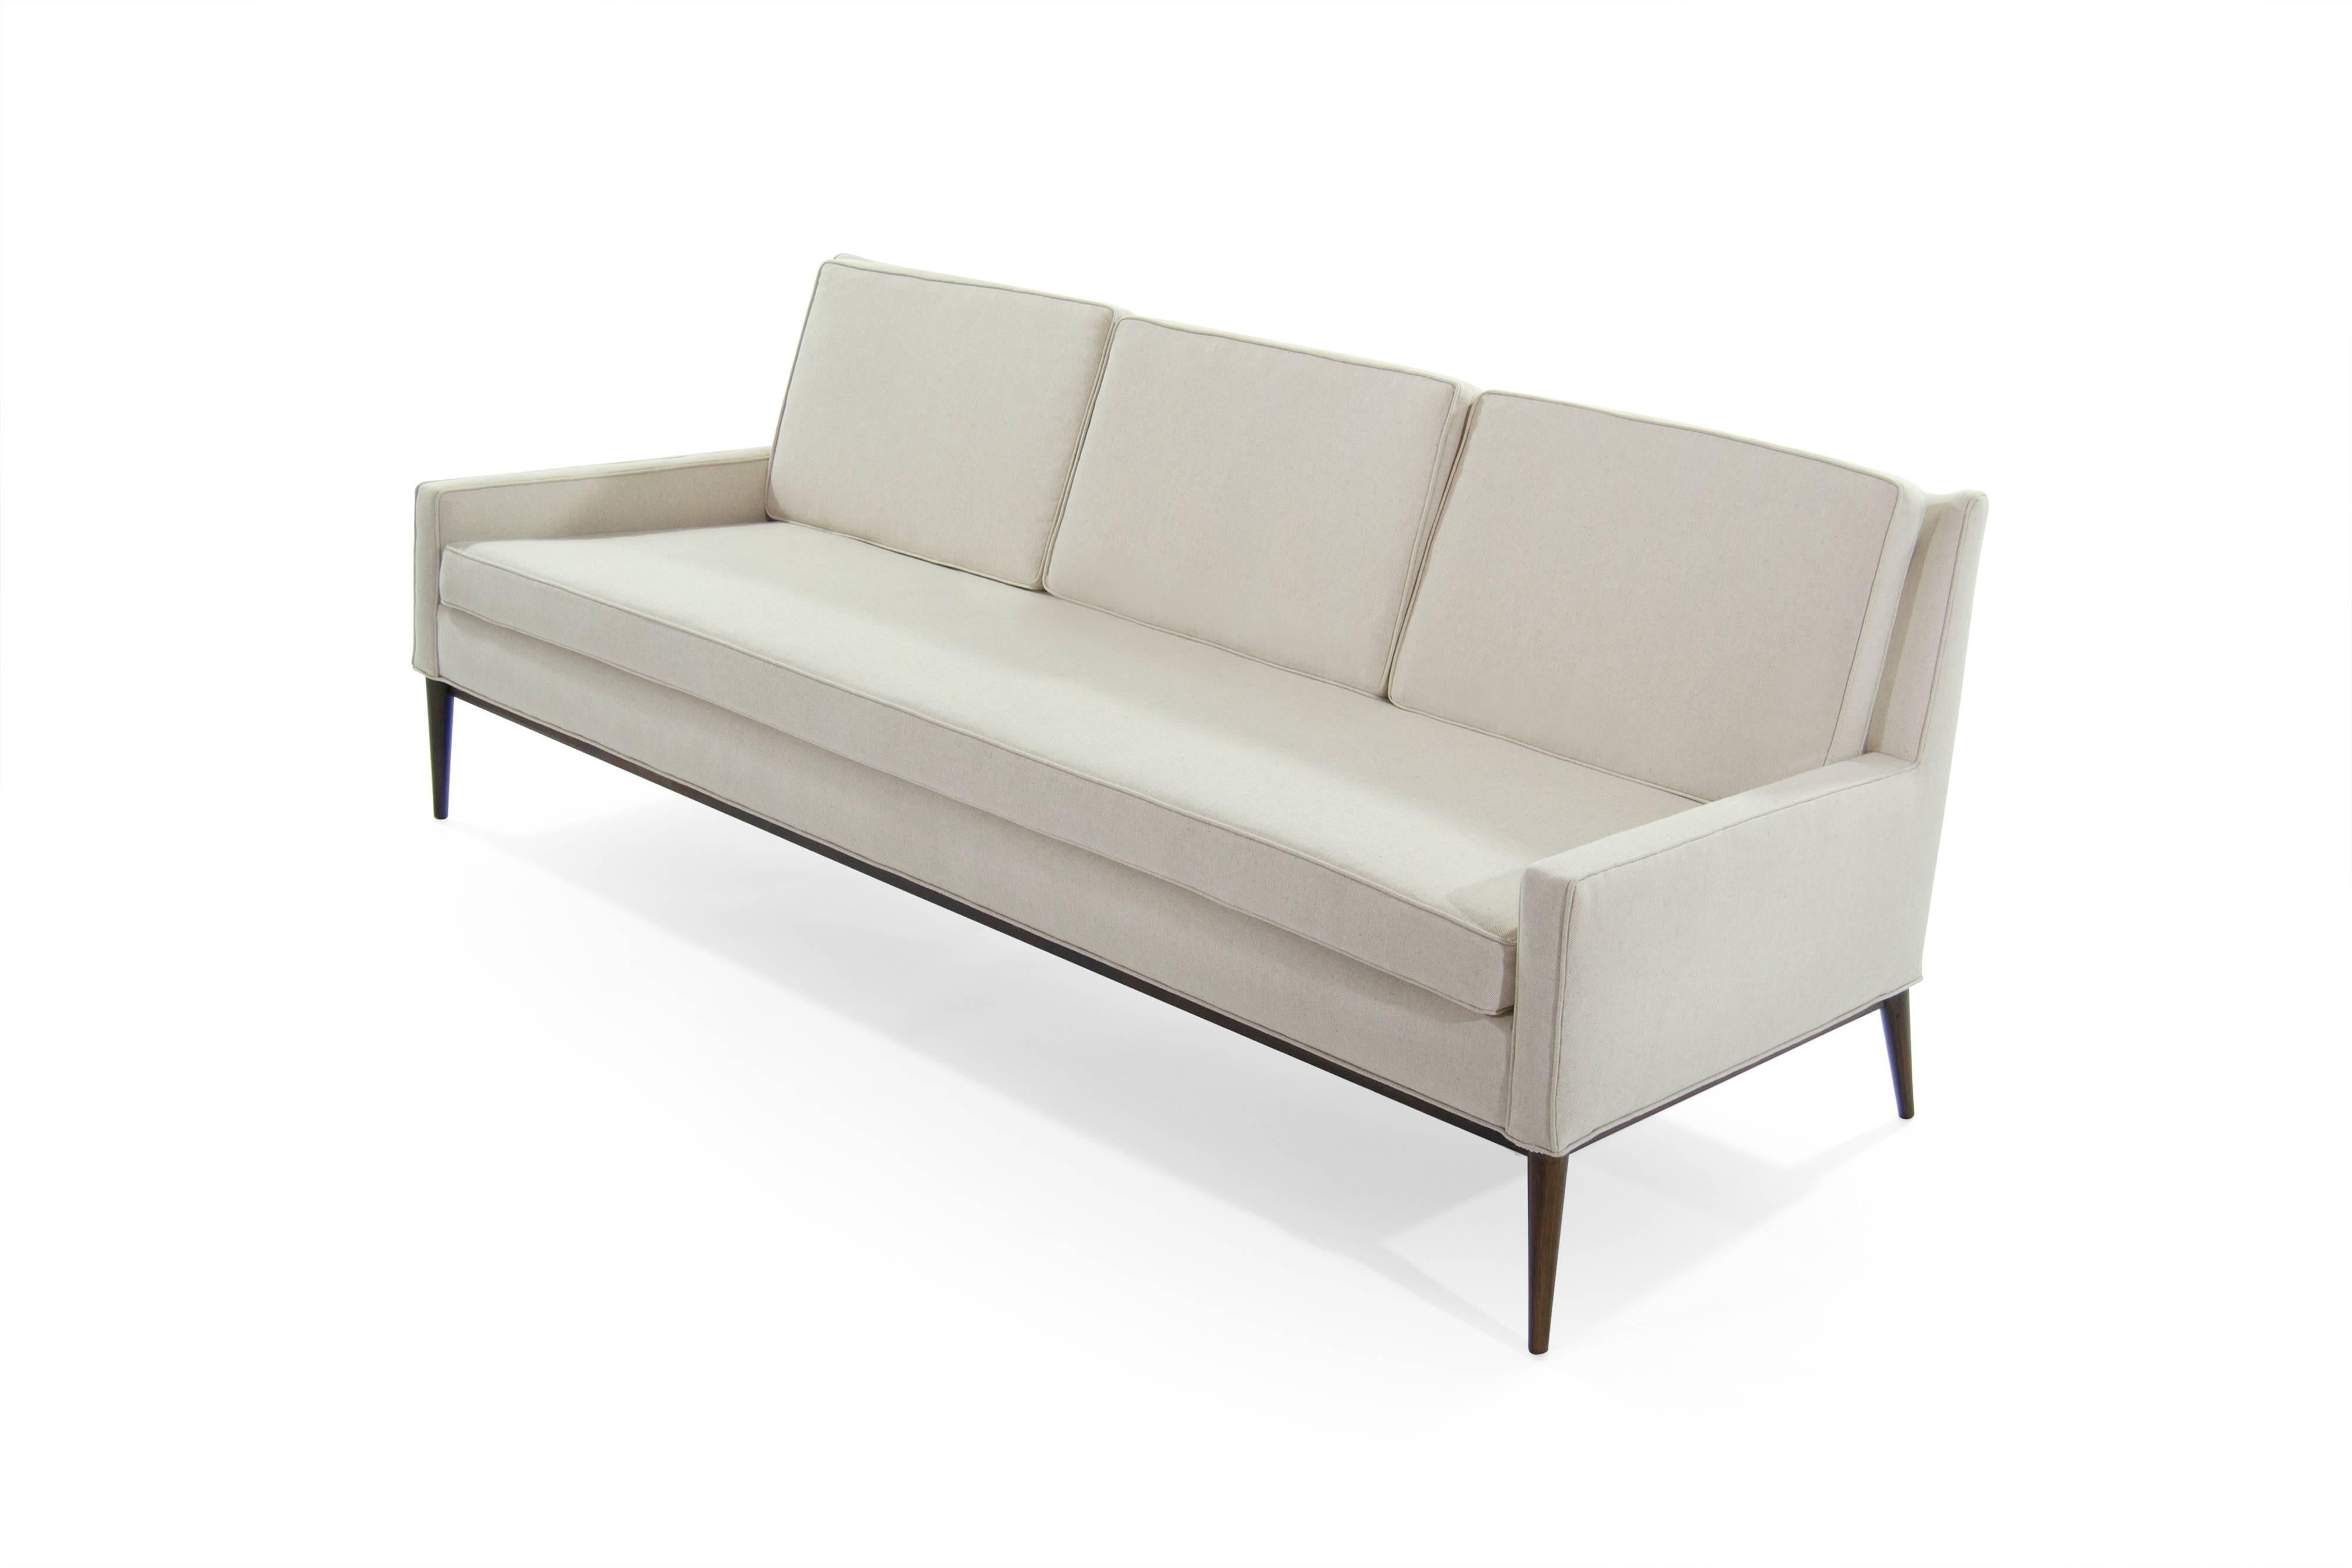 Sofa designed by Paul McCobb for Directional, model #1307, circa 1950s.

Newly upholstered in linen, walnut base fully restored. Listing is for single sofa.

          